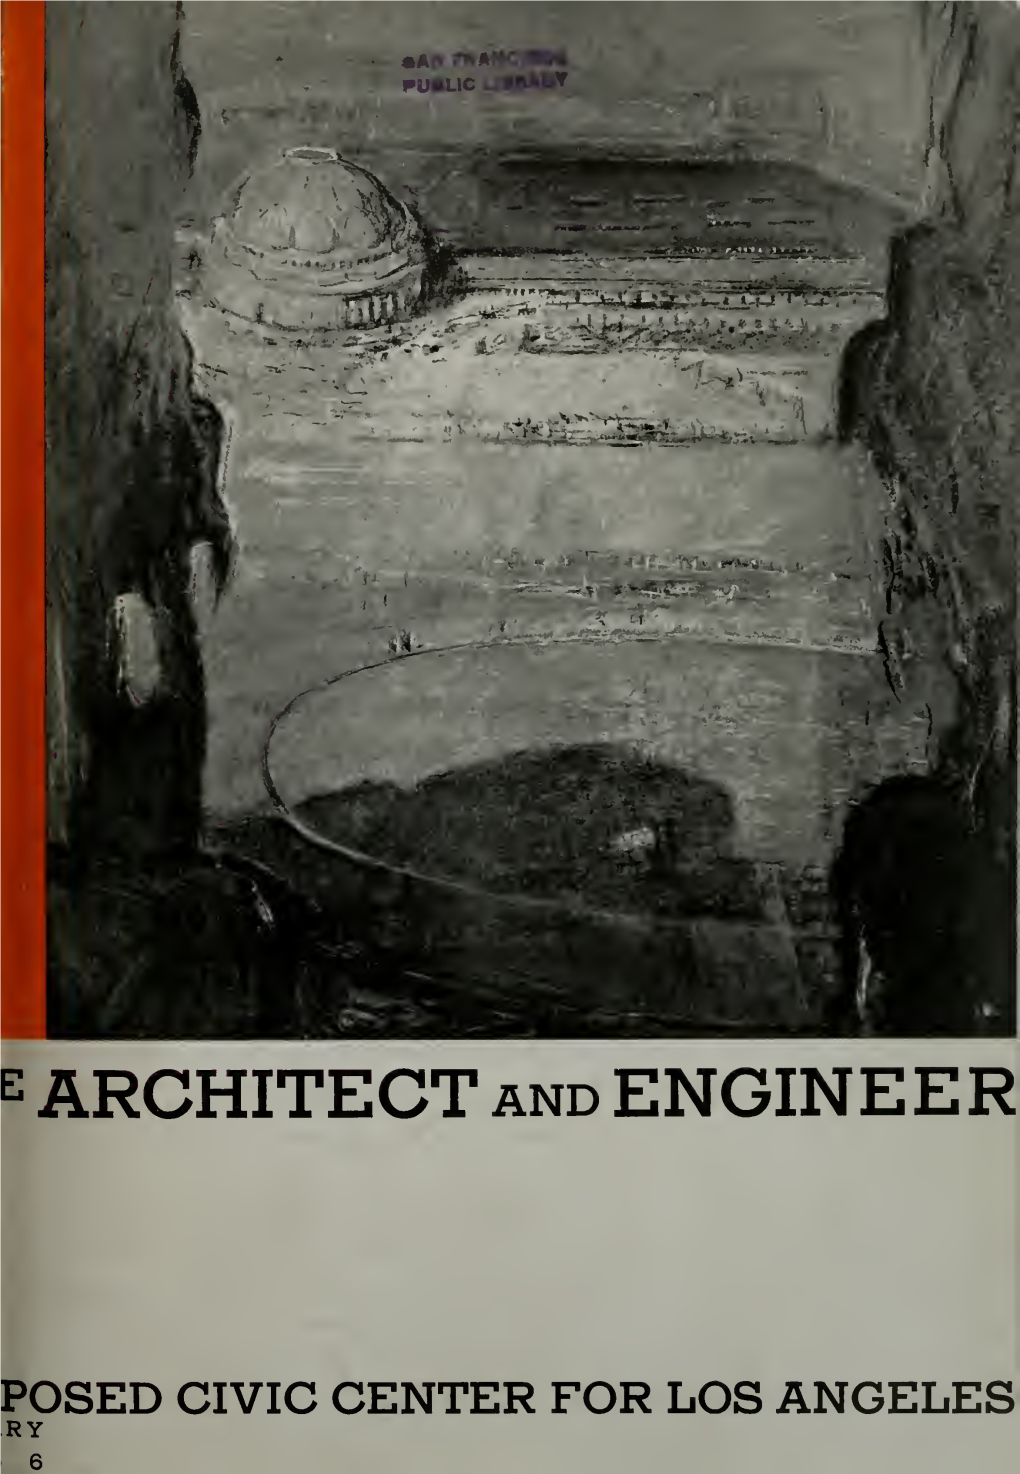 ARCHITECT and ENGINEER